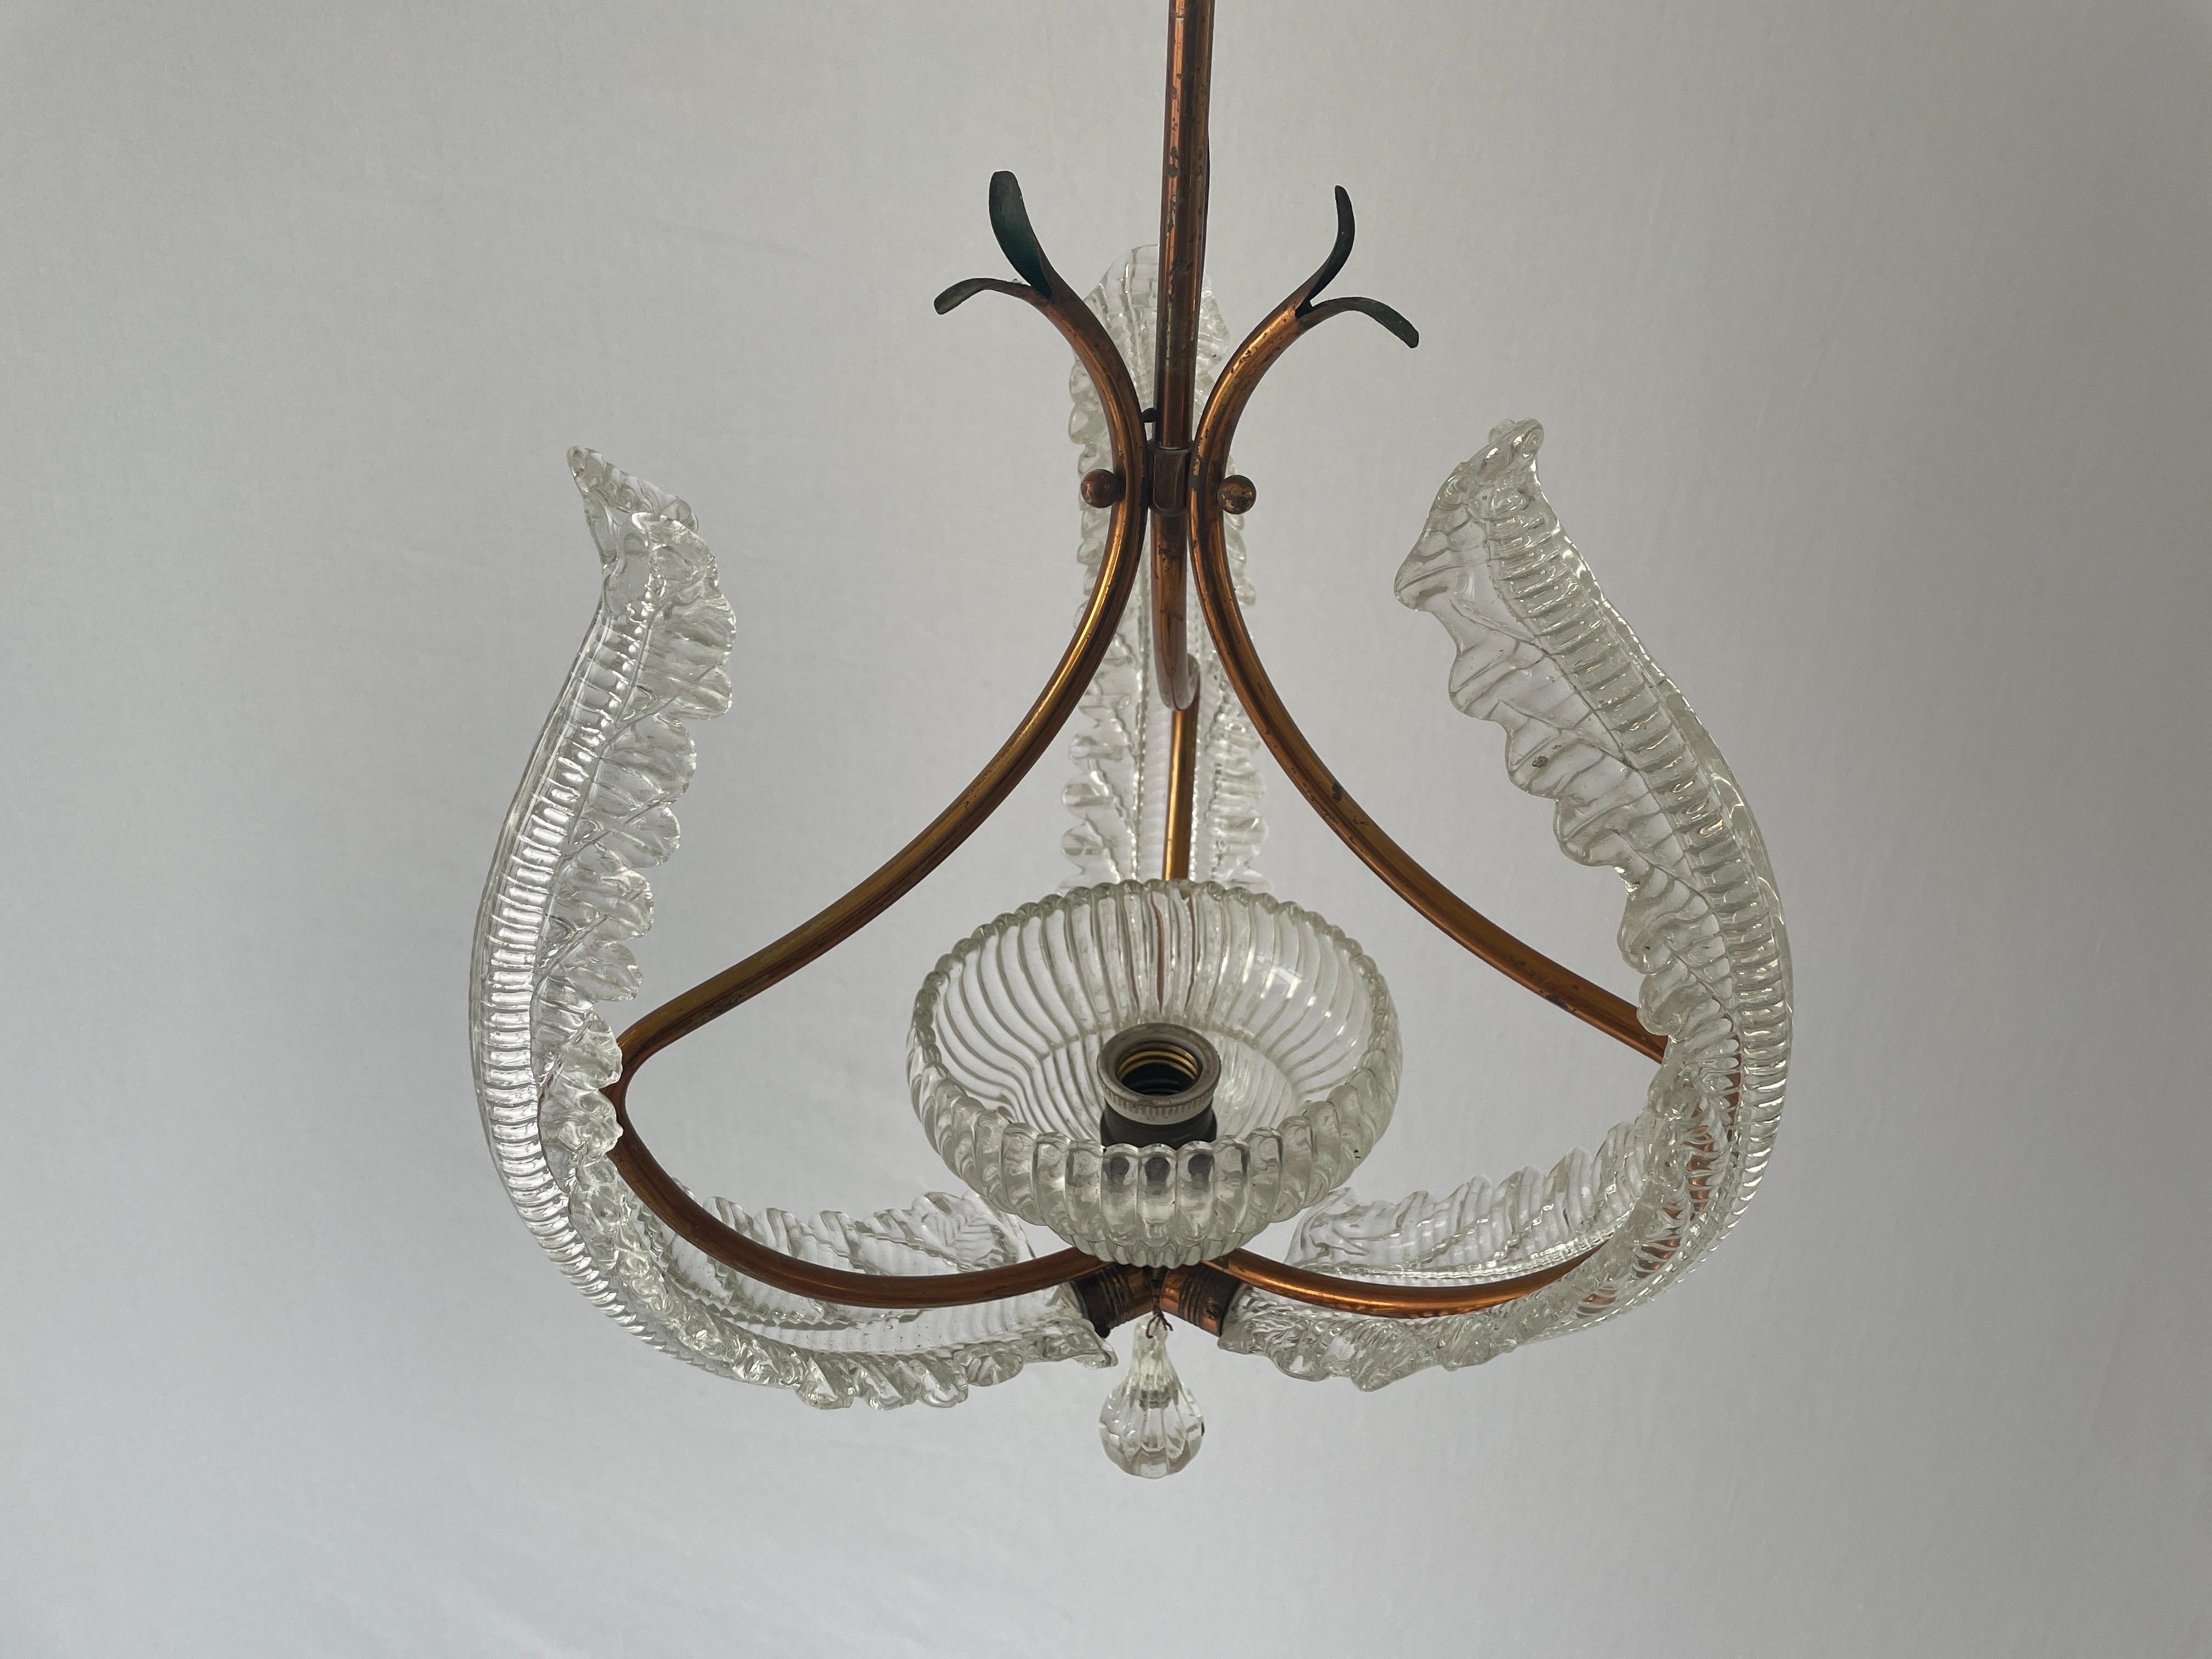 Murano Glass Chandelier by Barovier & Toso, 1940s, Italy
 
Lampshade is in very good vintage condition.

This lamp works with E27 light bulb. 
Wired and suitable to use with 220V and 110V for all countries.

Measurements:
Height: 90cm
Shade diameter